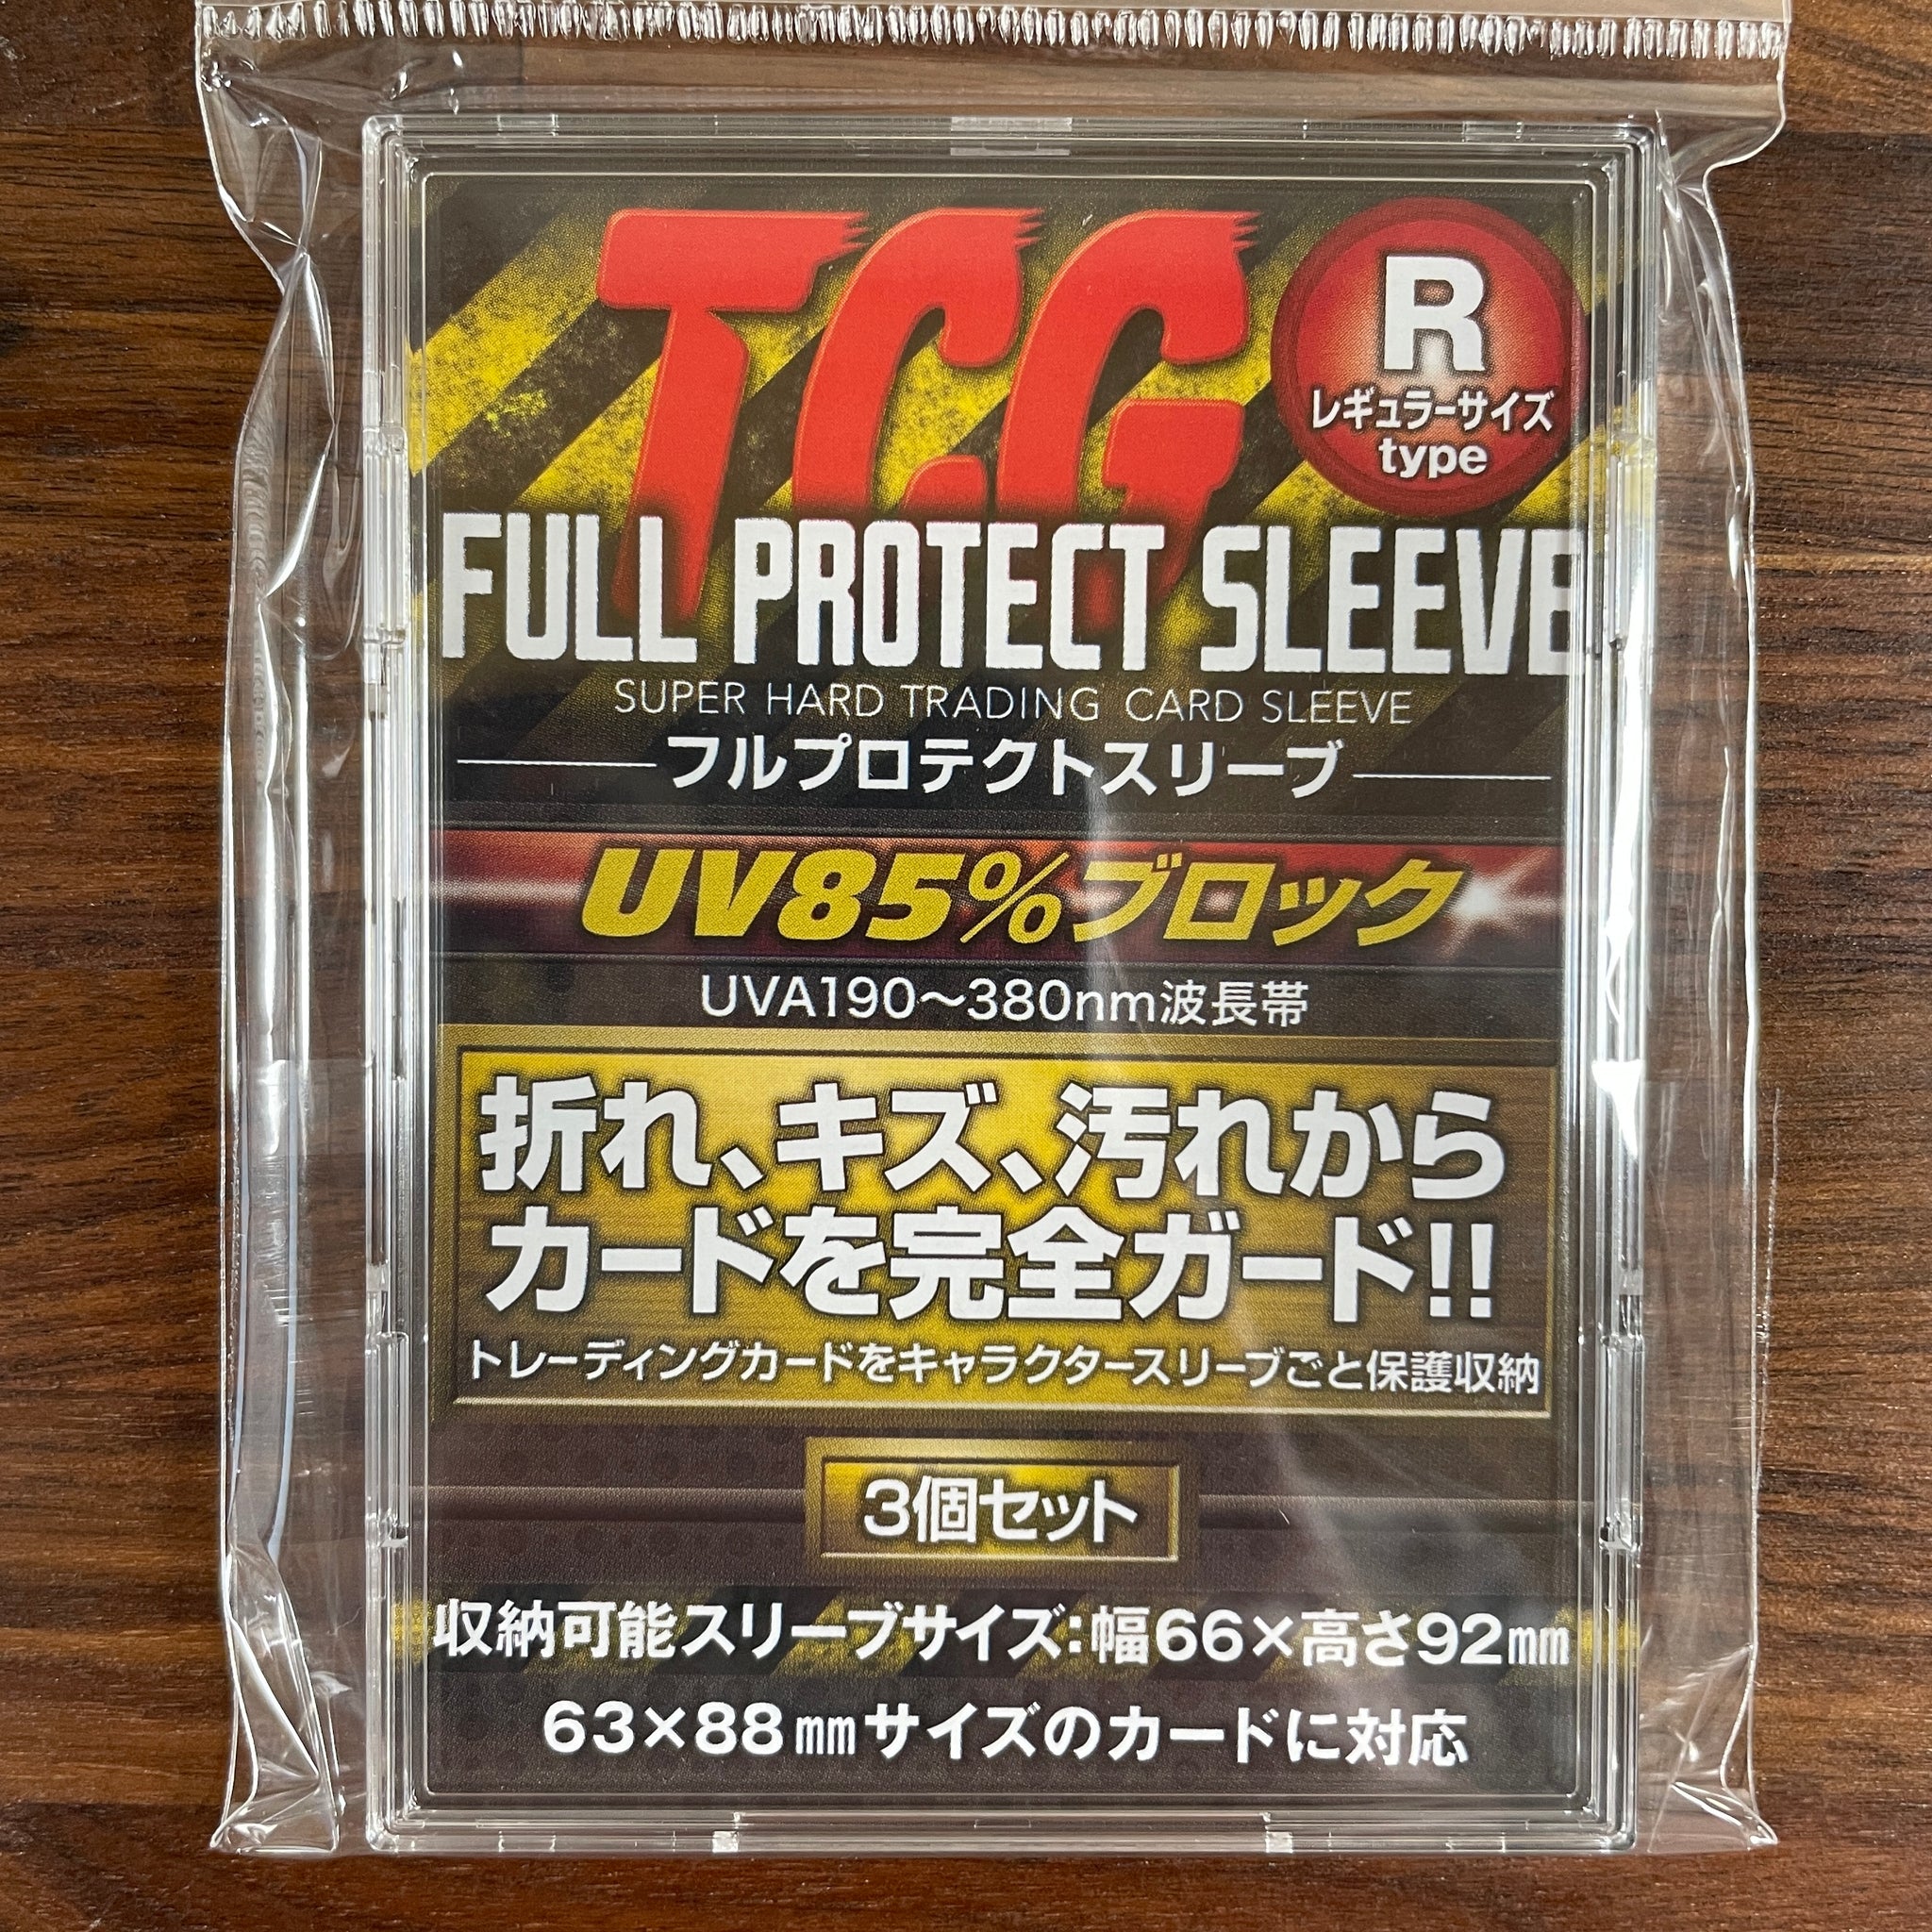 Proof that perfect fit dragon shield sleeves fit (63 x 88) : r